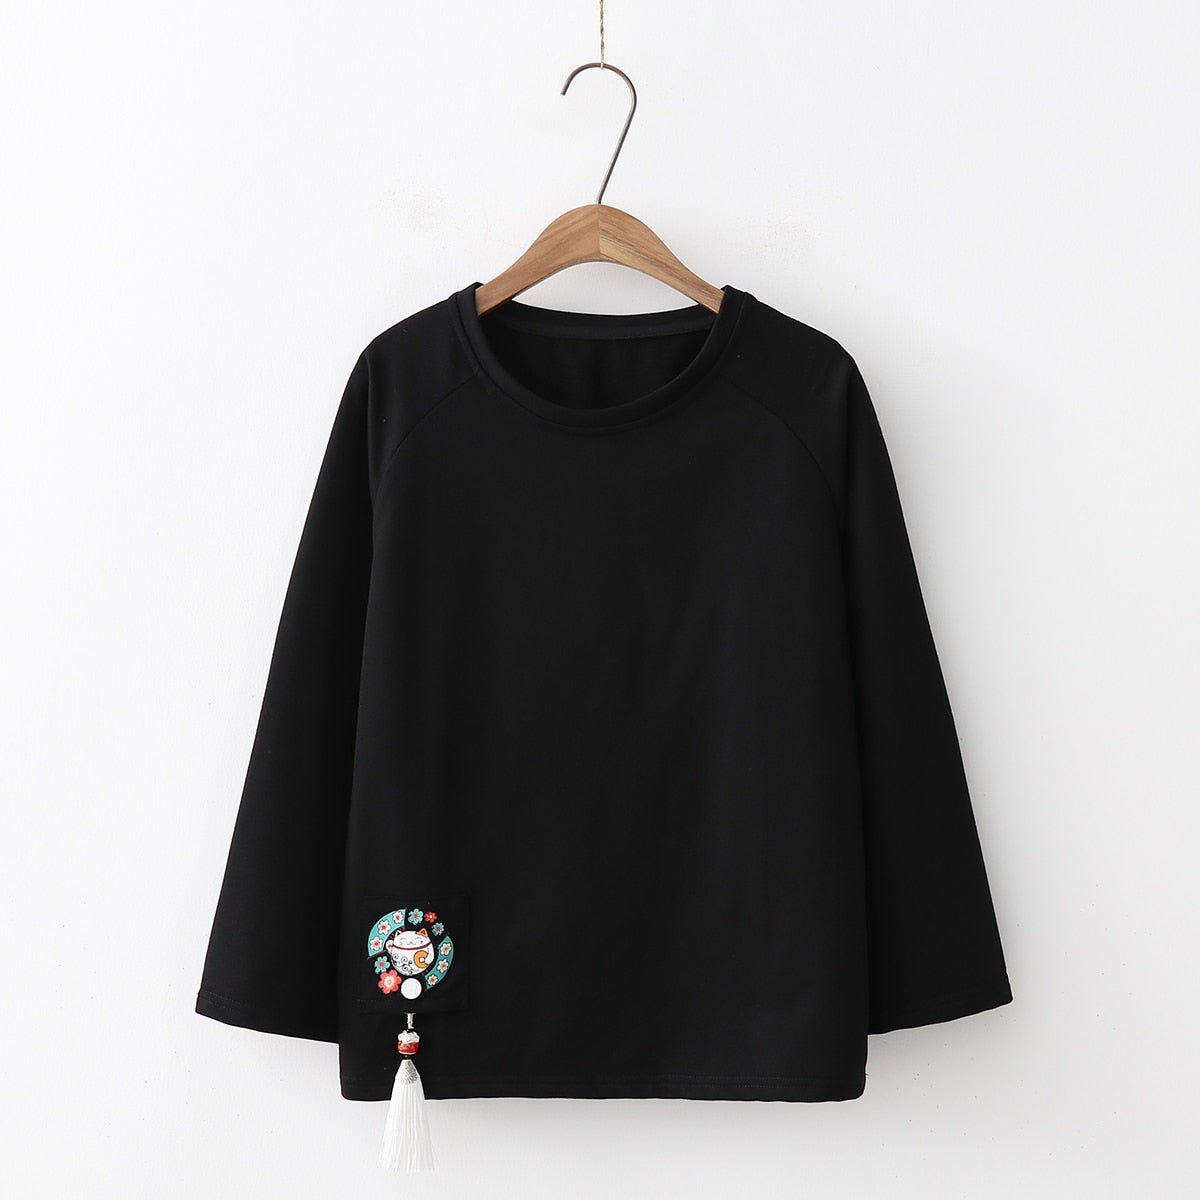 a black long sleeves cat sweater for woman made from high quality cotton